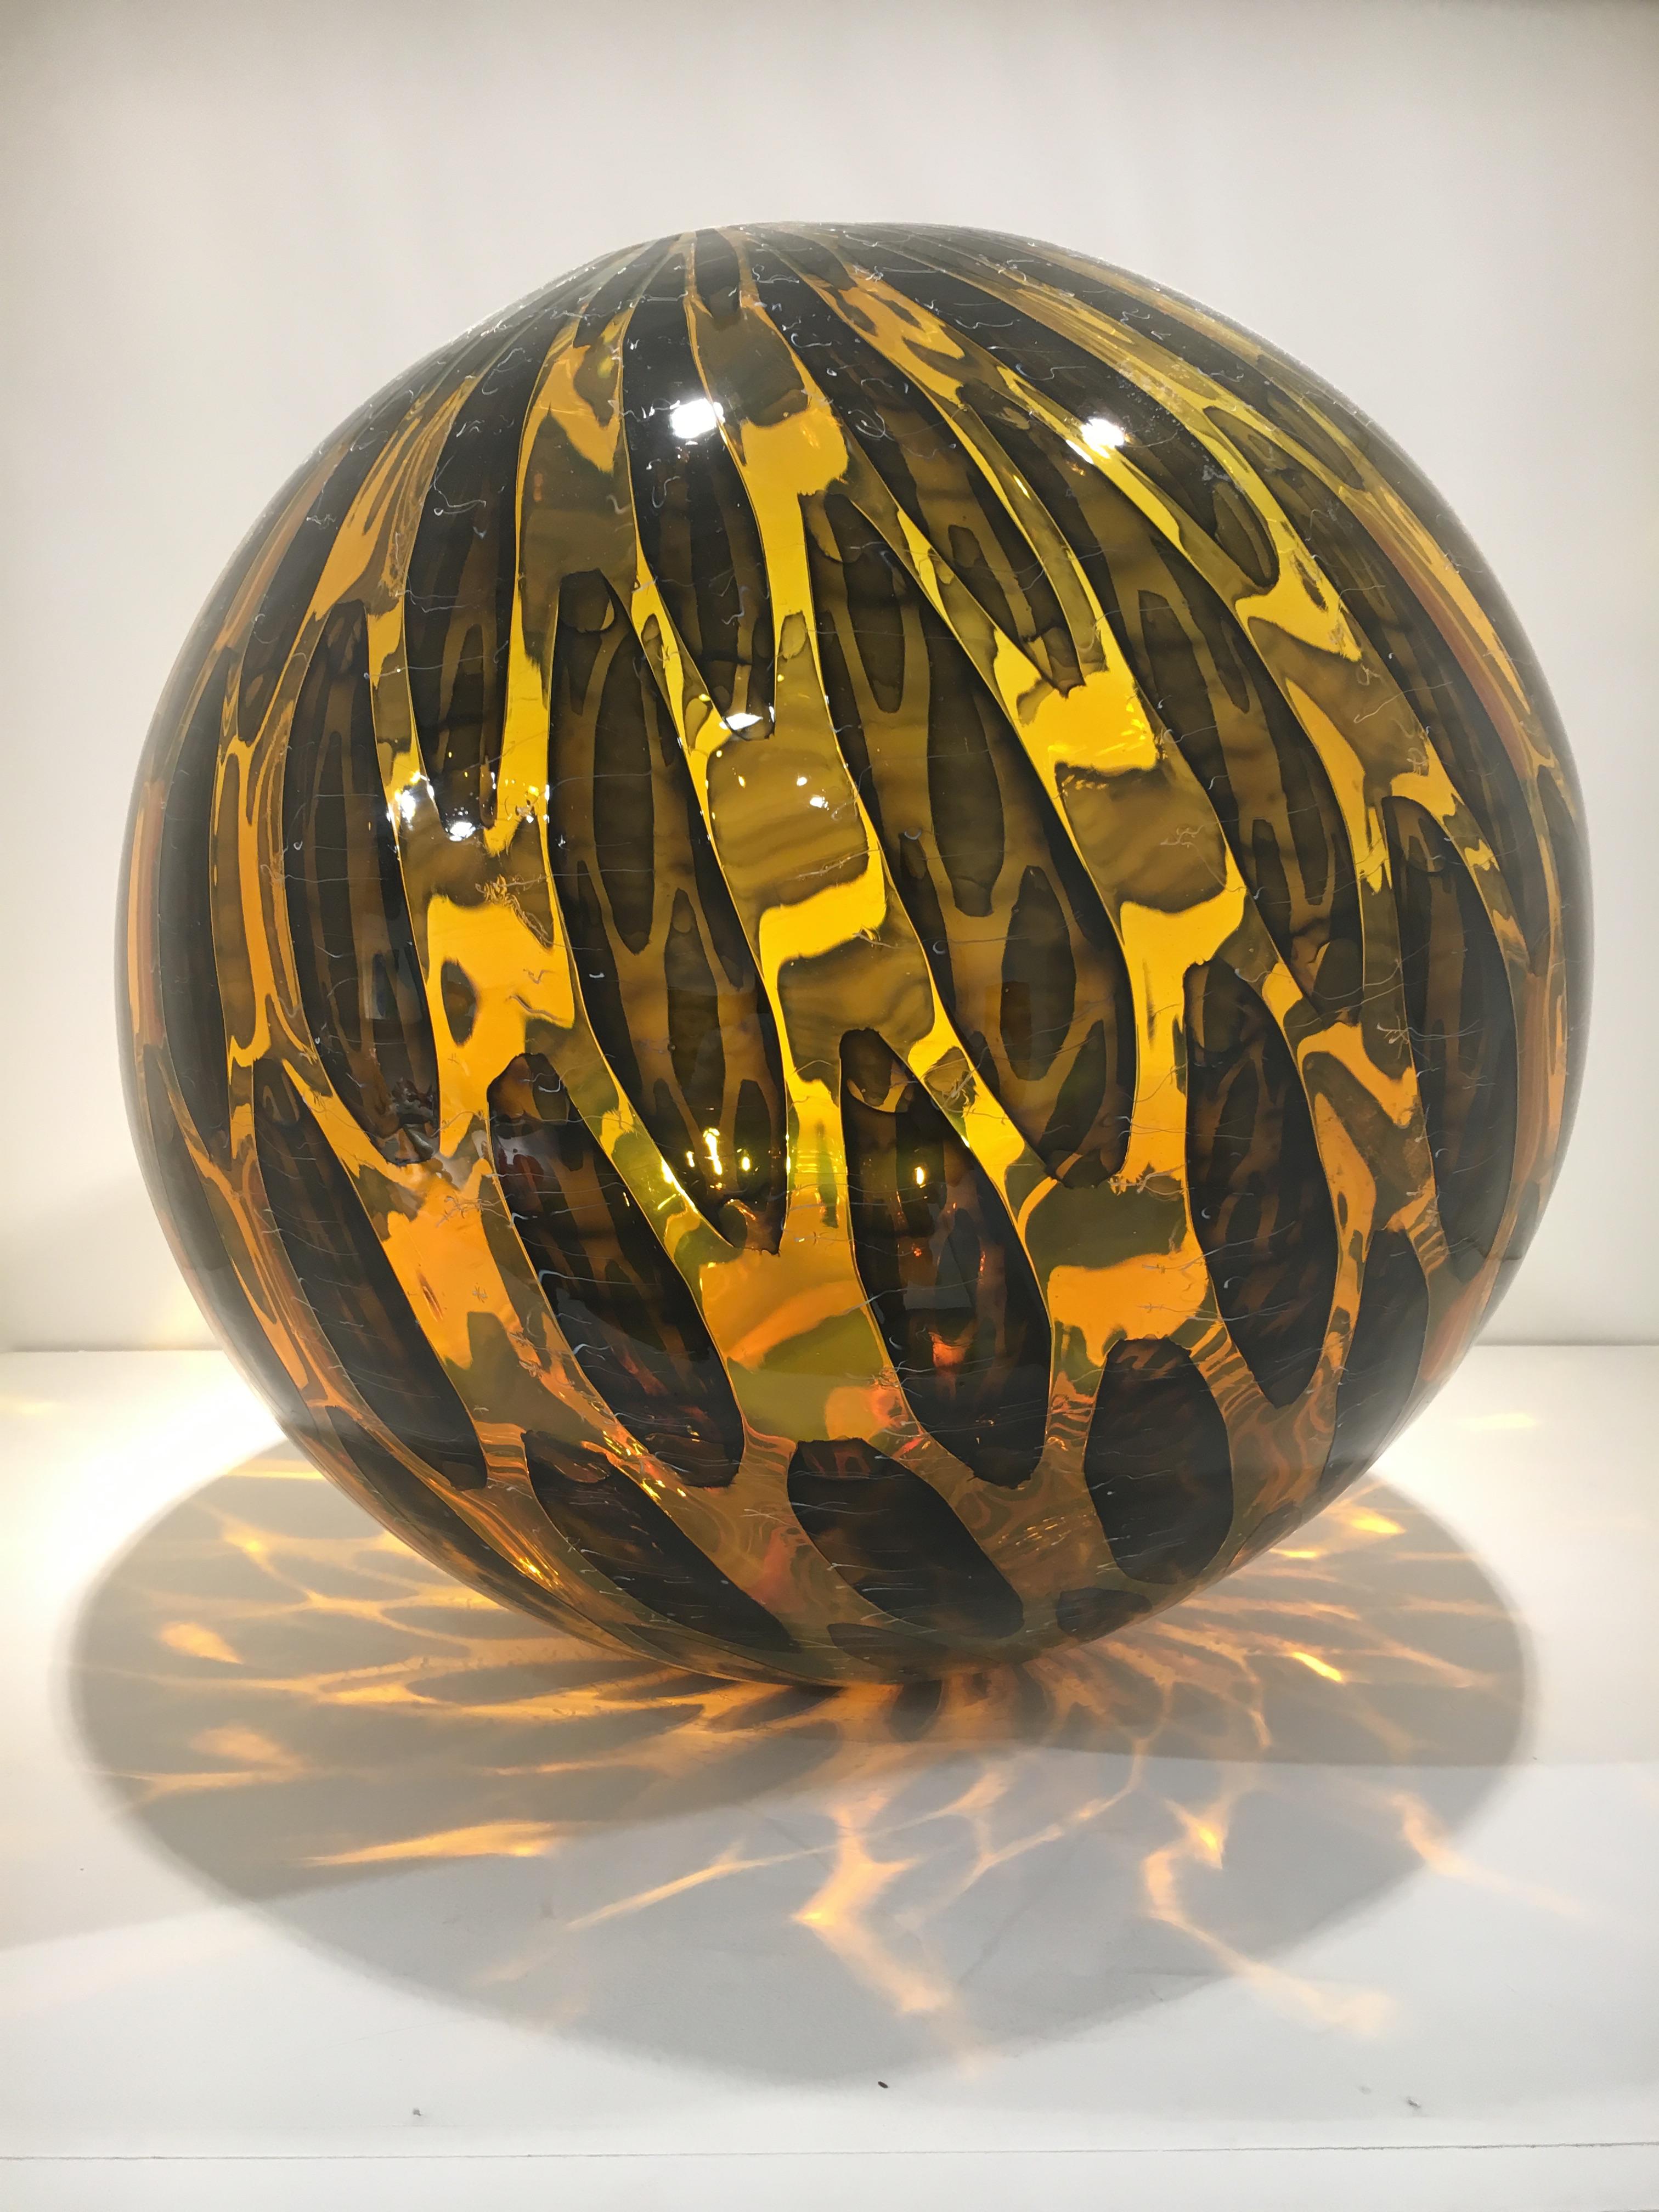 Nancy Callan’s artistic voice as a glass sculptor reflects her high-level training and talents. Since attending the Massachusetts College of Art (BFA 1996), Callan has received numerous awards including the Creative Glass Center of America